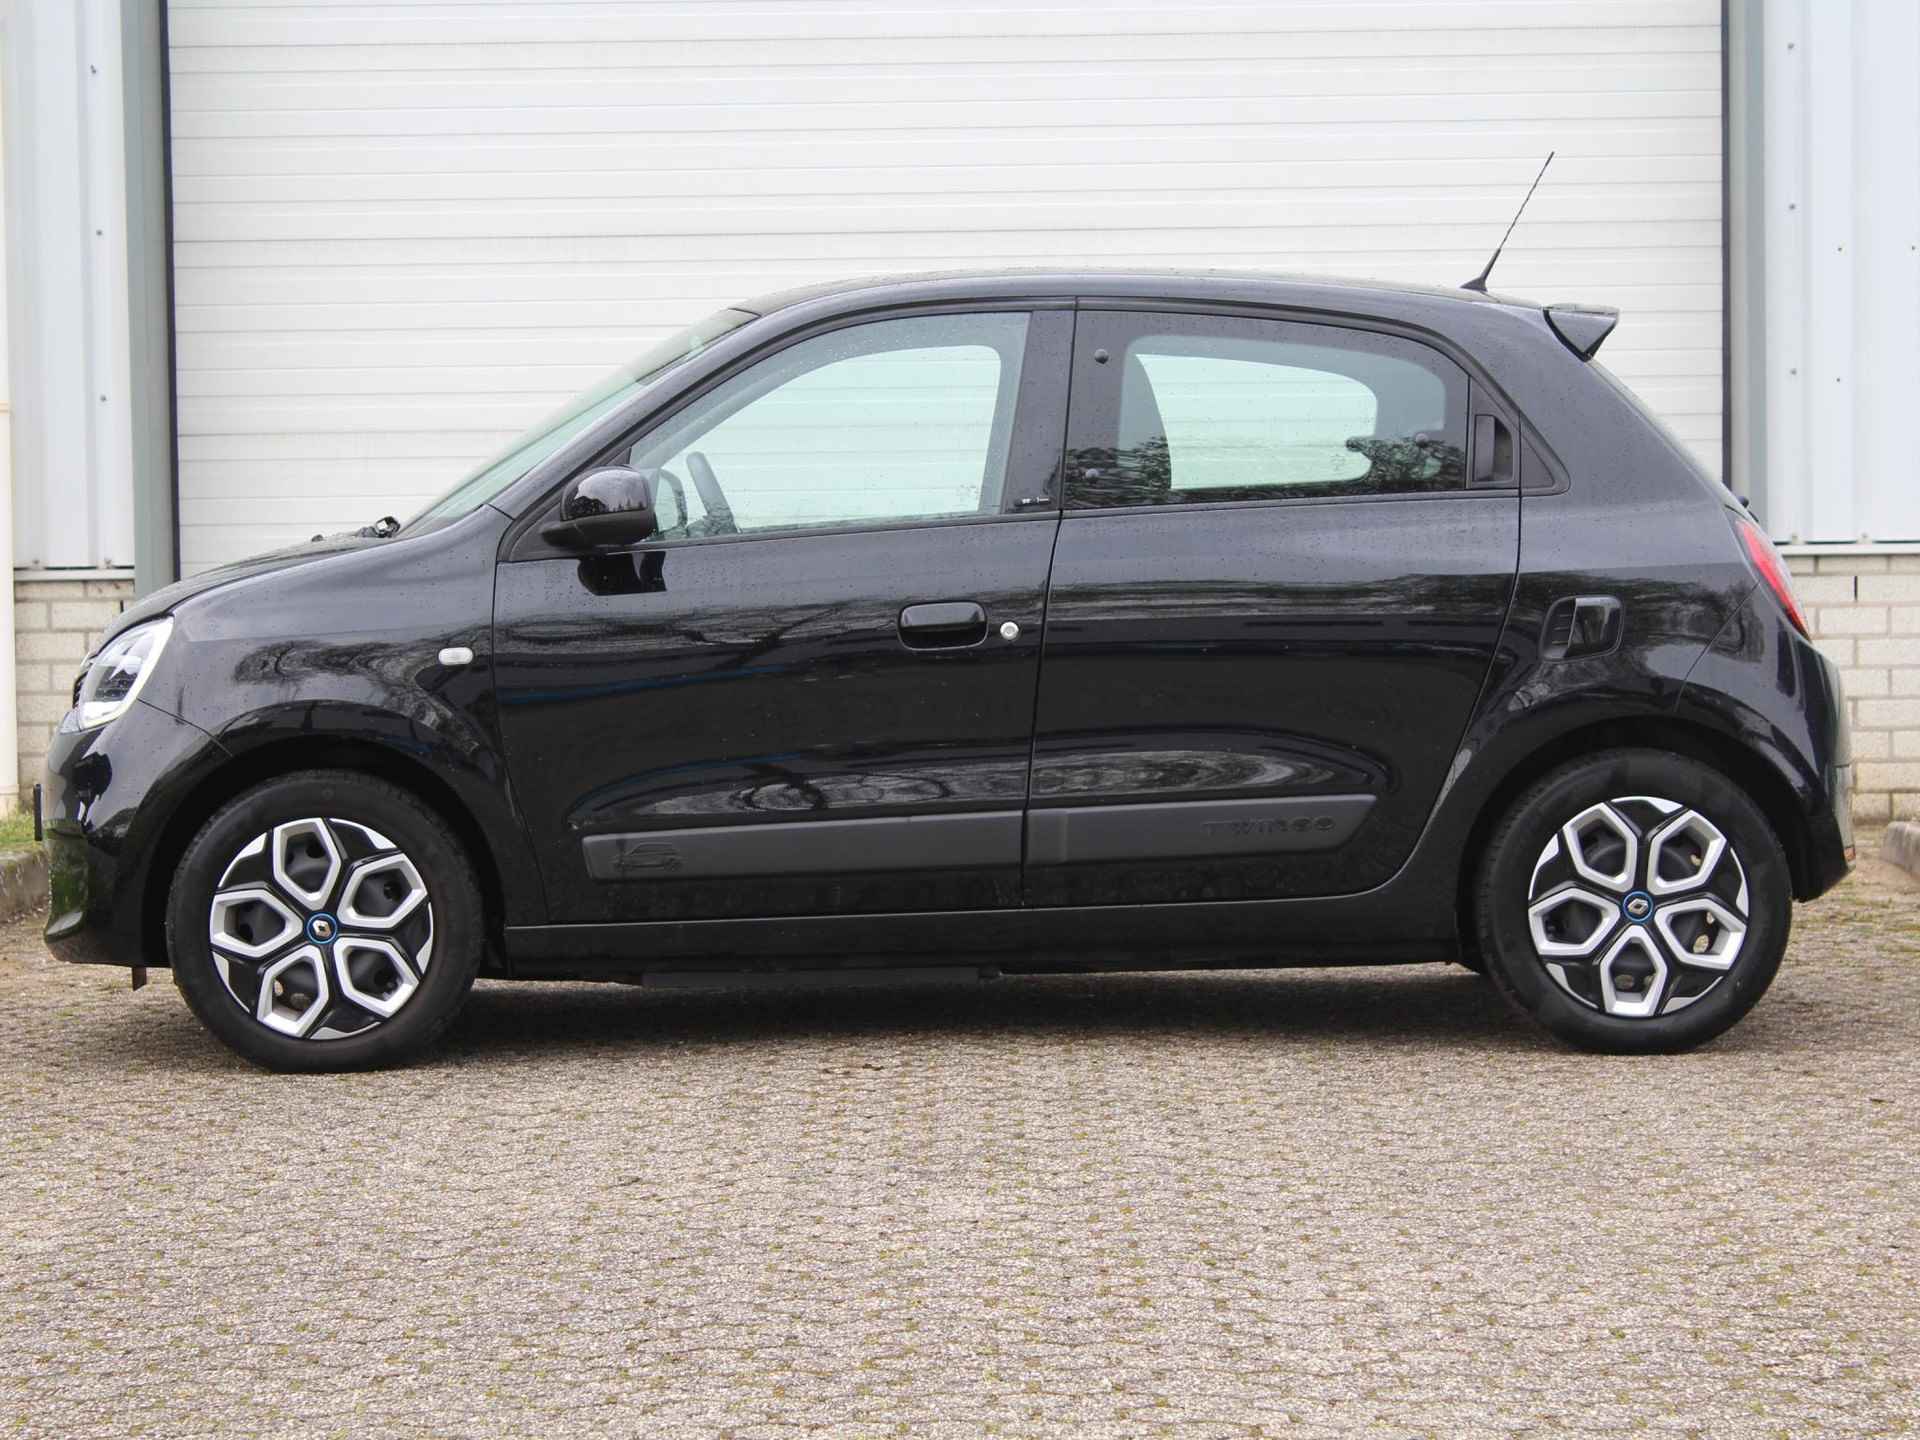 Renault Twingo Z.E. R80 Collection / SUBSIDIE  € 2000,- mogelijk / AUTOMAAT / Navigatiesysteem / Airco / Apple Car Play & Android Auto / DAB / Led dagrijverlichting / Metaalkleur / Cruise control - 8/47